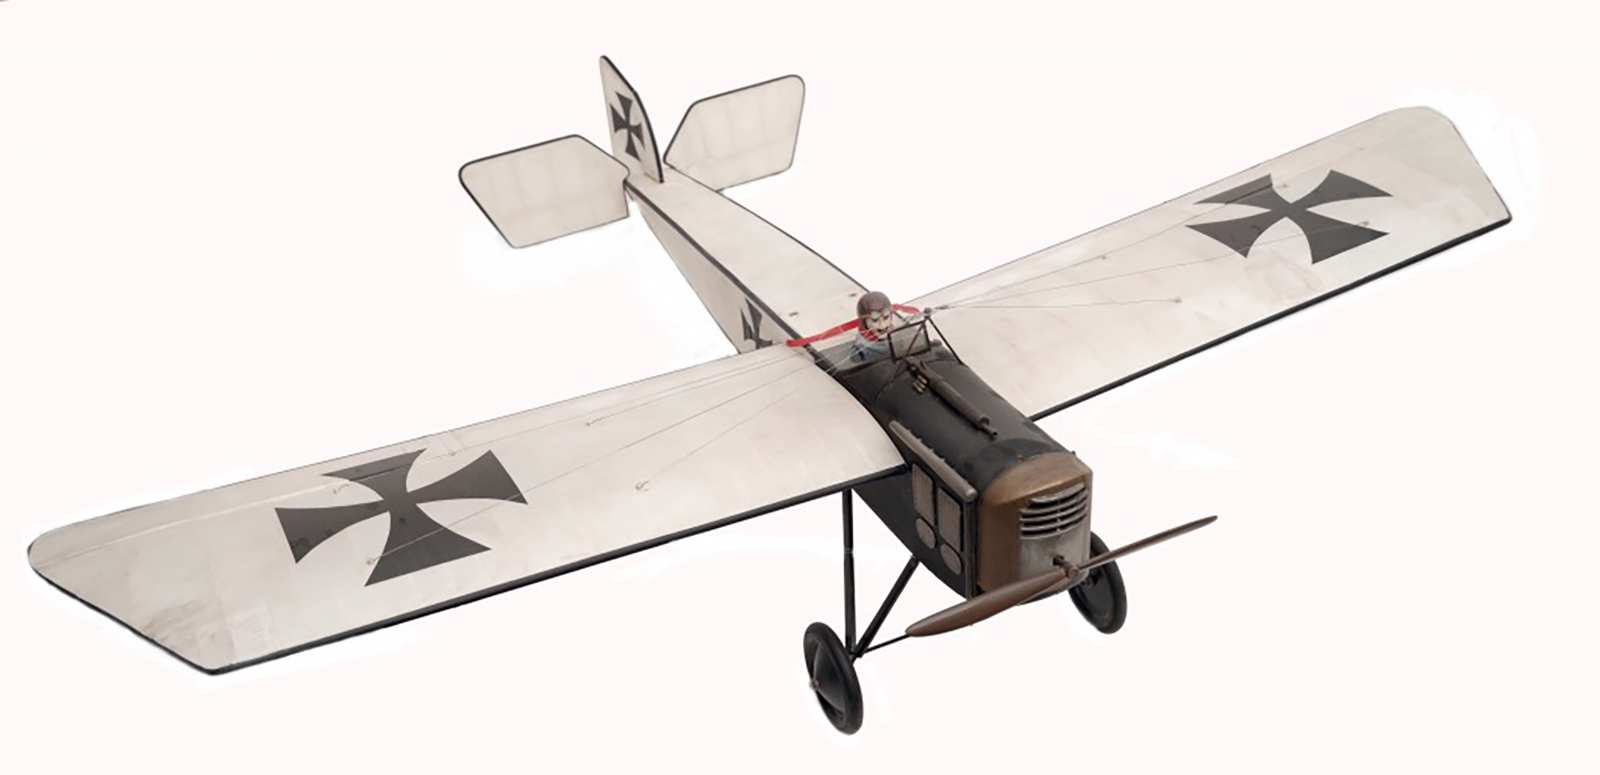 A Scale Model of a German WWI Bleriot